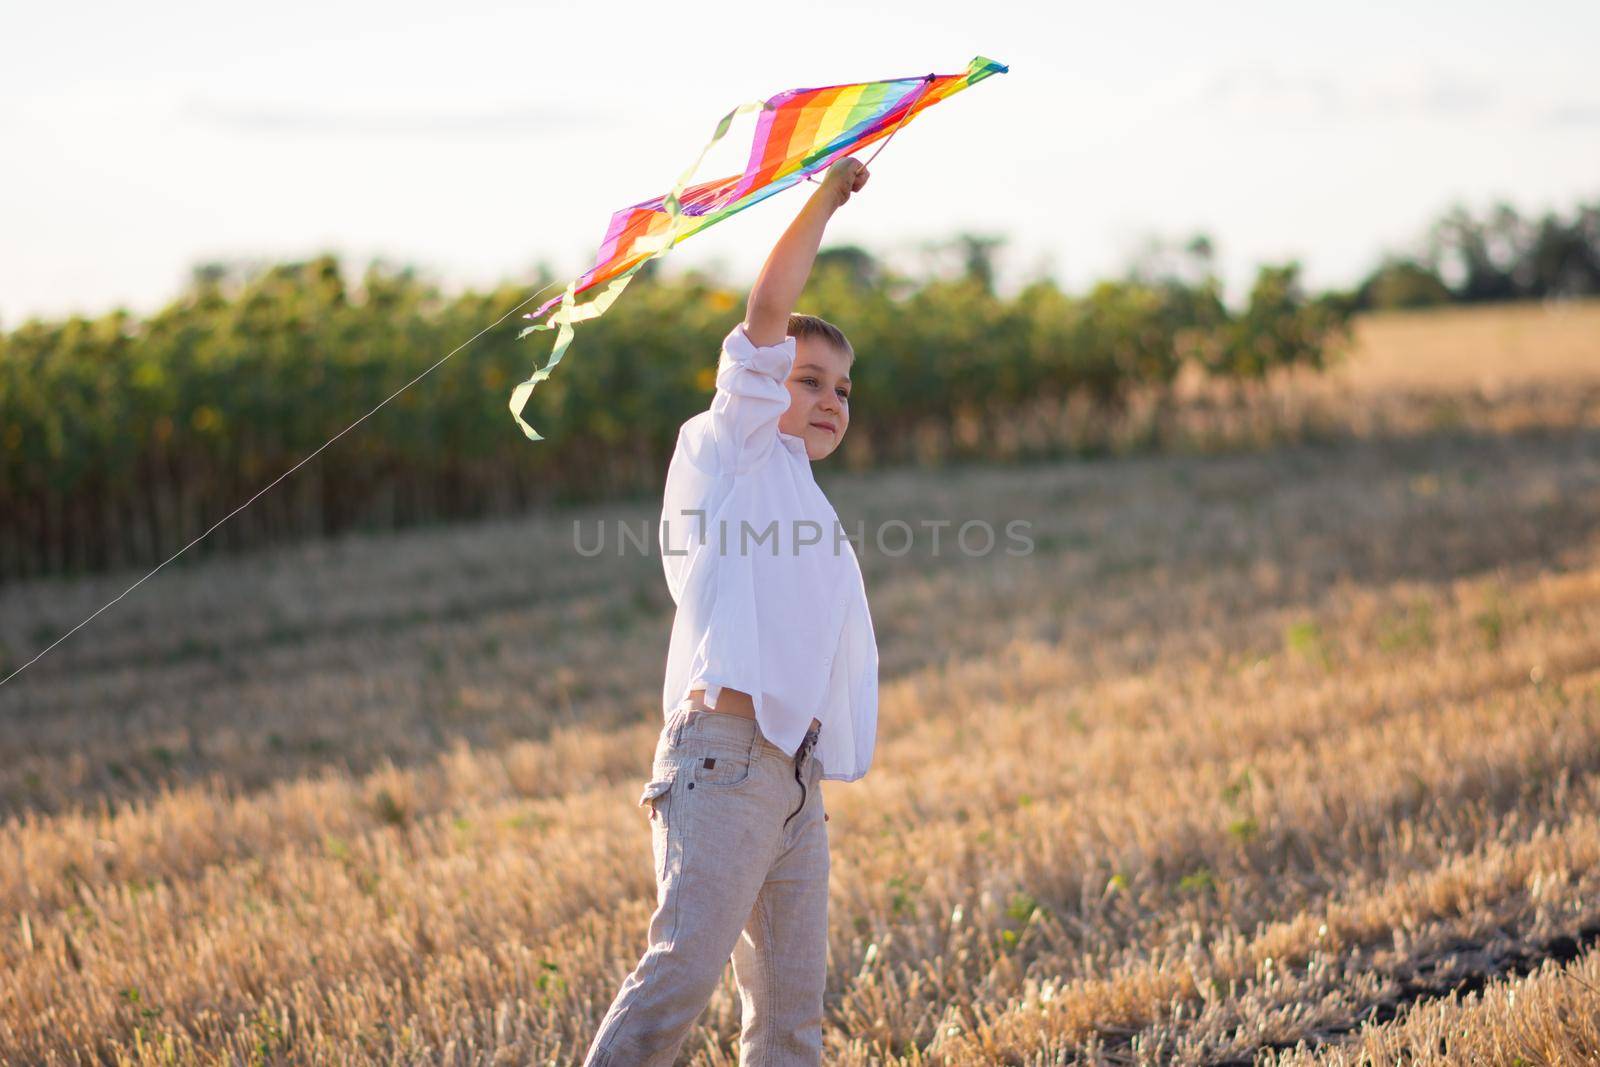 The boy holds the kite at arm's length up. Rural landscape. A field with dry grass.